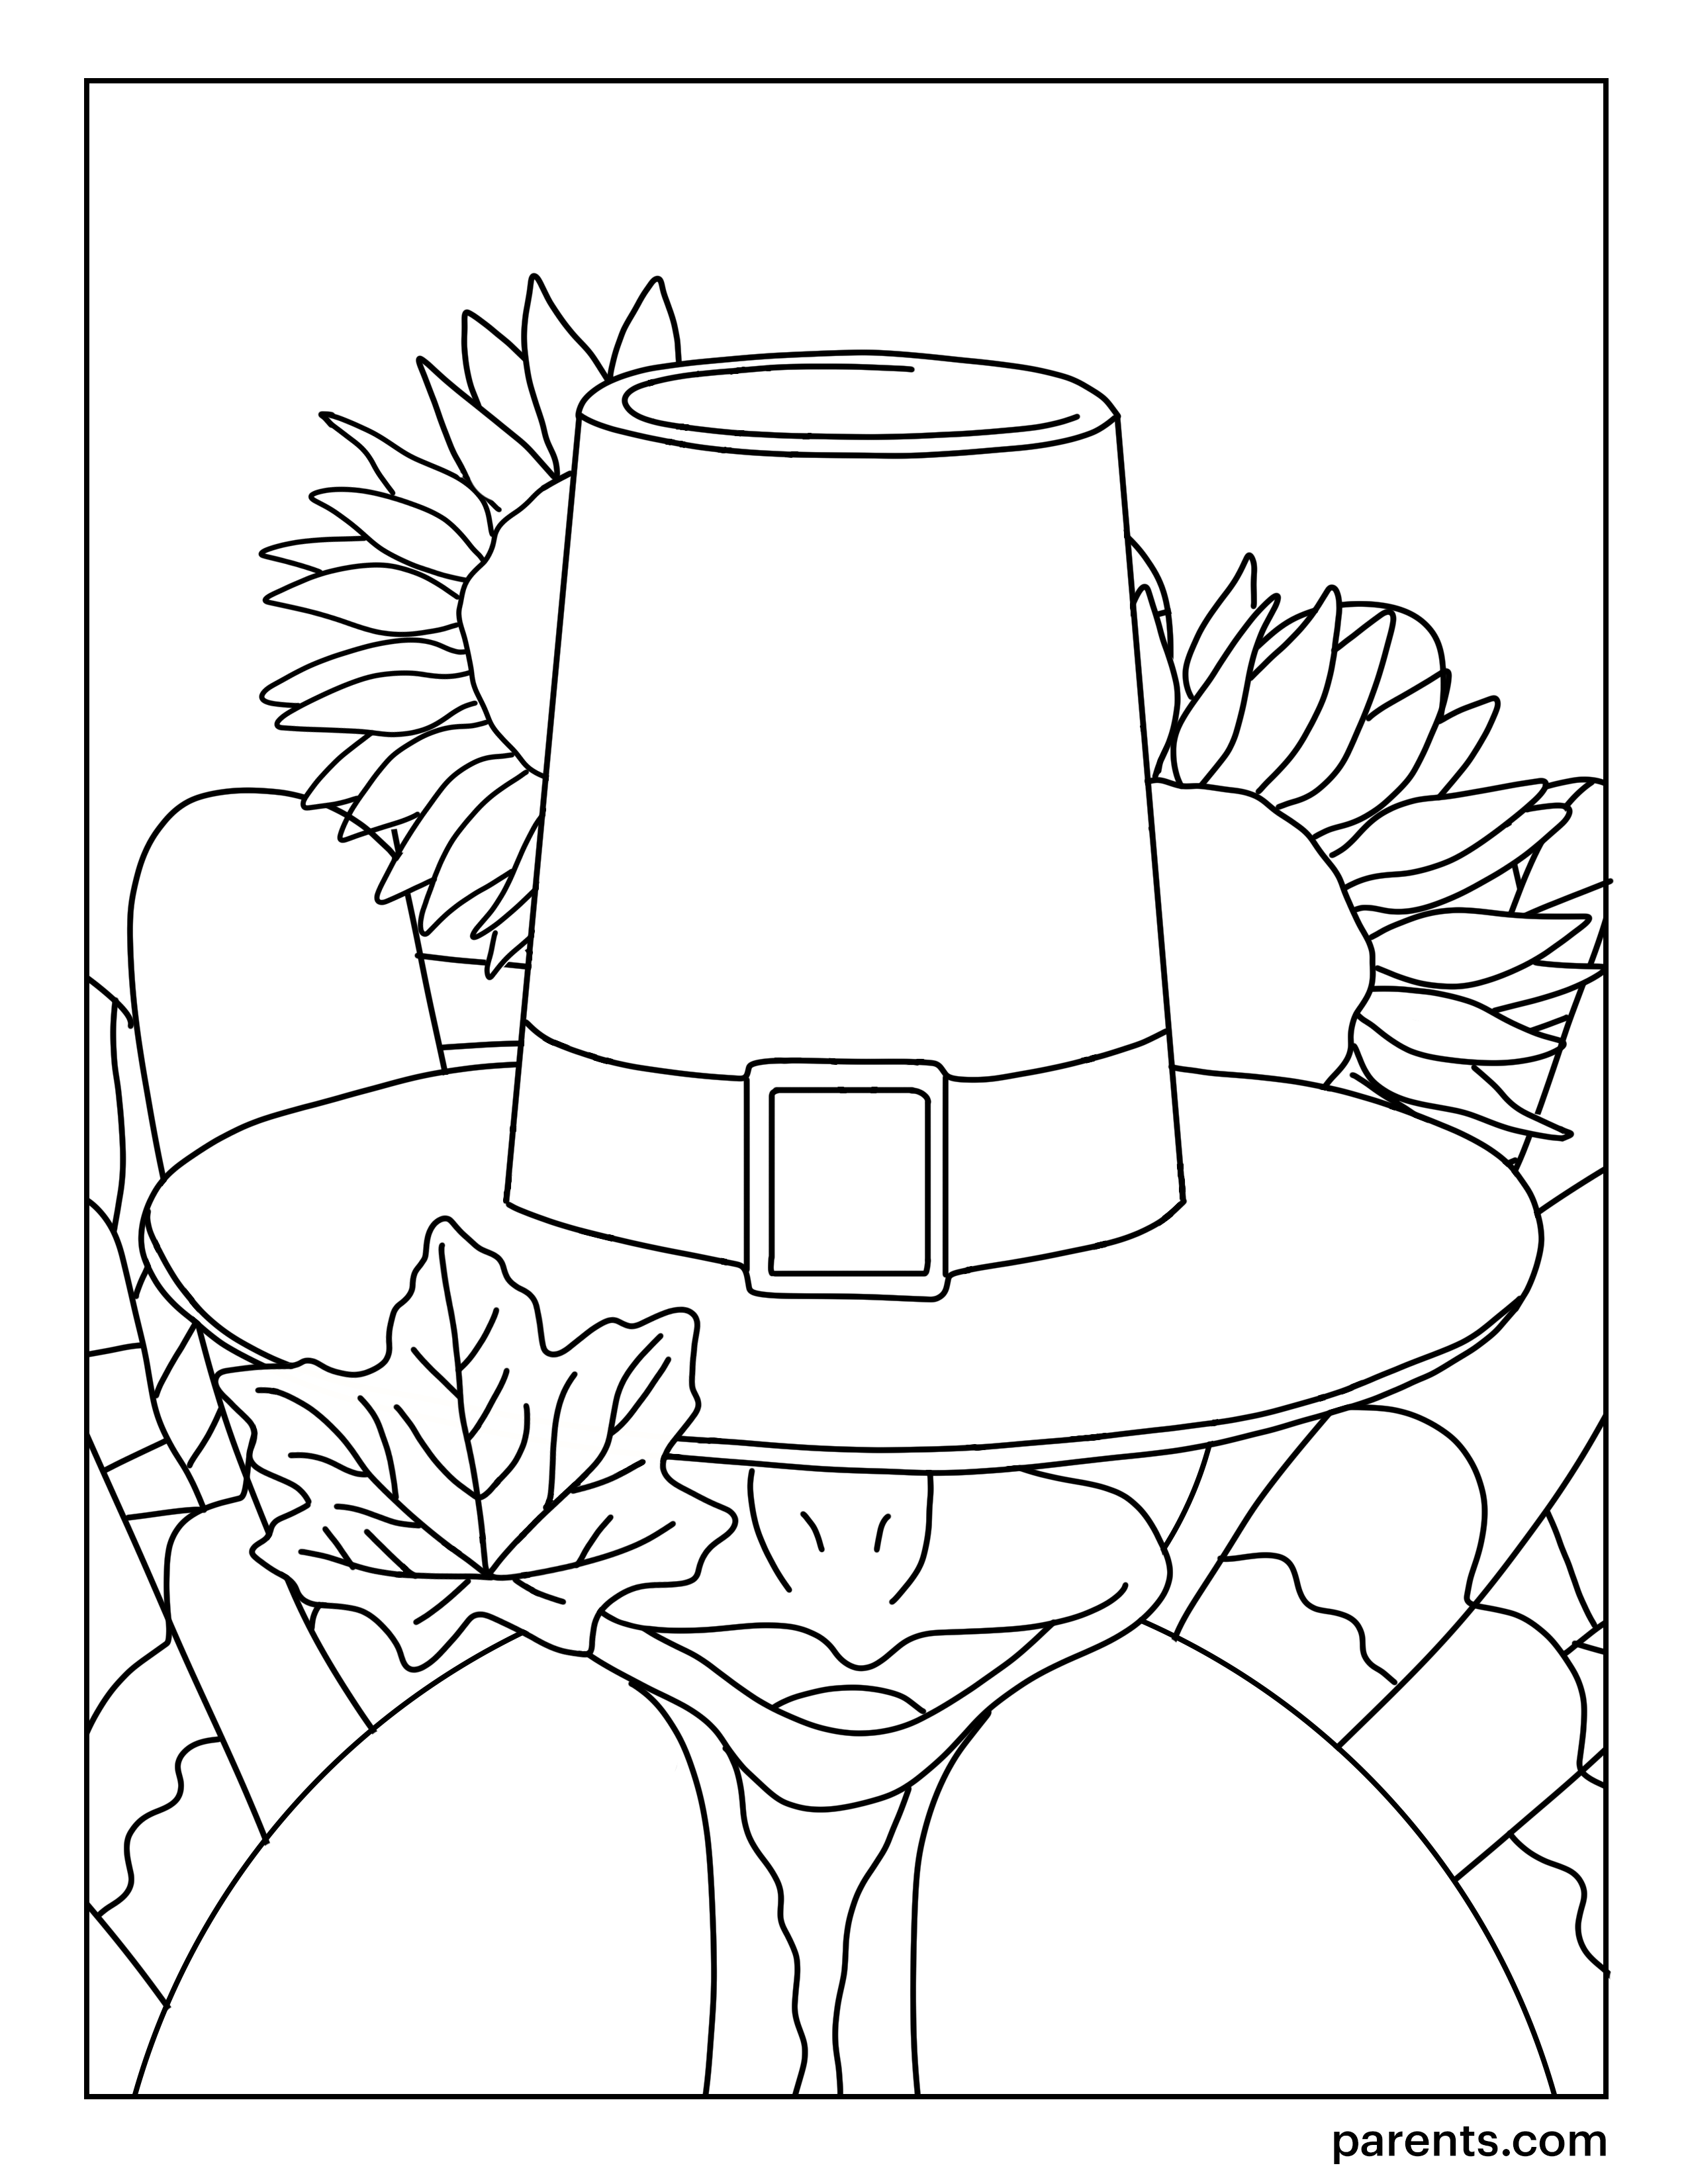 Turkey Coloring Pages to Print for Thanksgiving | Parents